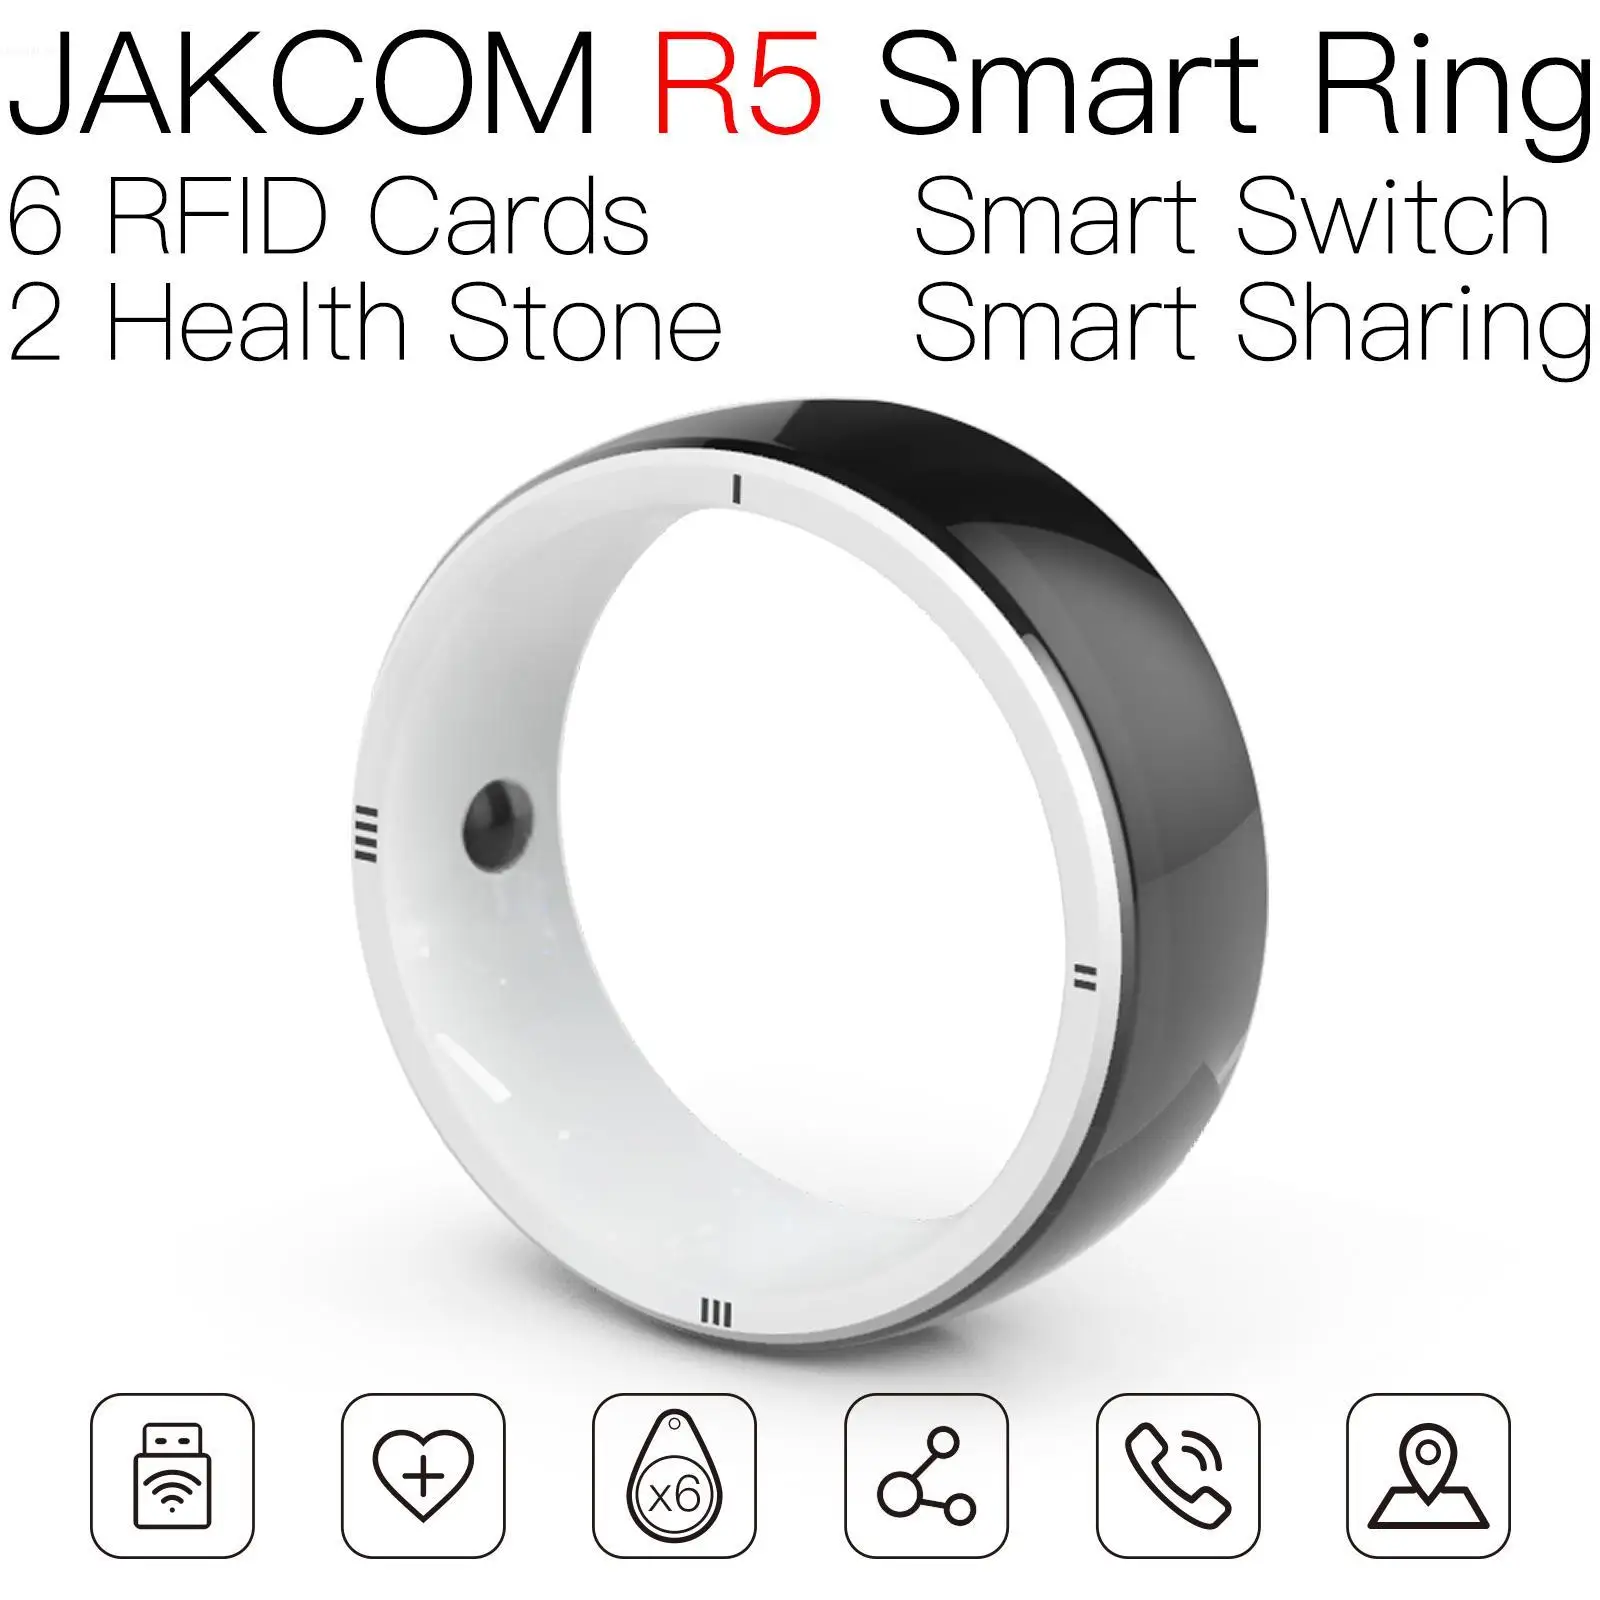 

JAKCOM R5 Smart Ring Nice than pay difference padlock id chip bracelet rfid ic dual frequency em4100 nfc labels nano 125khz